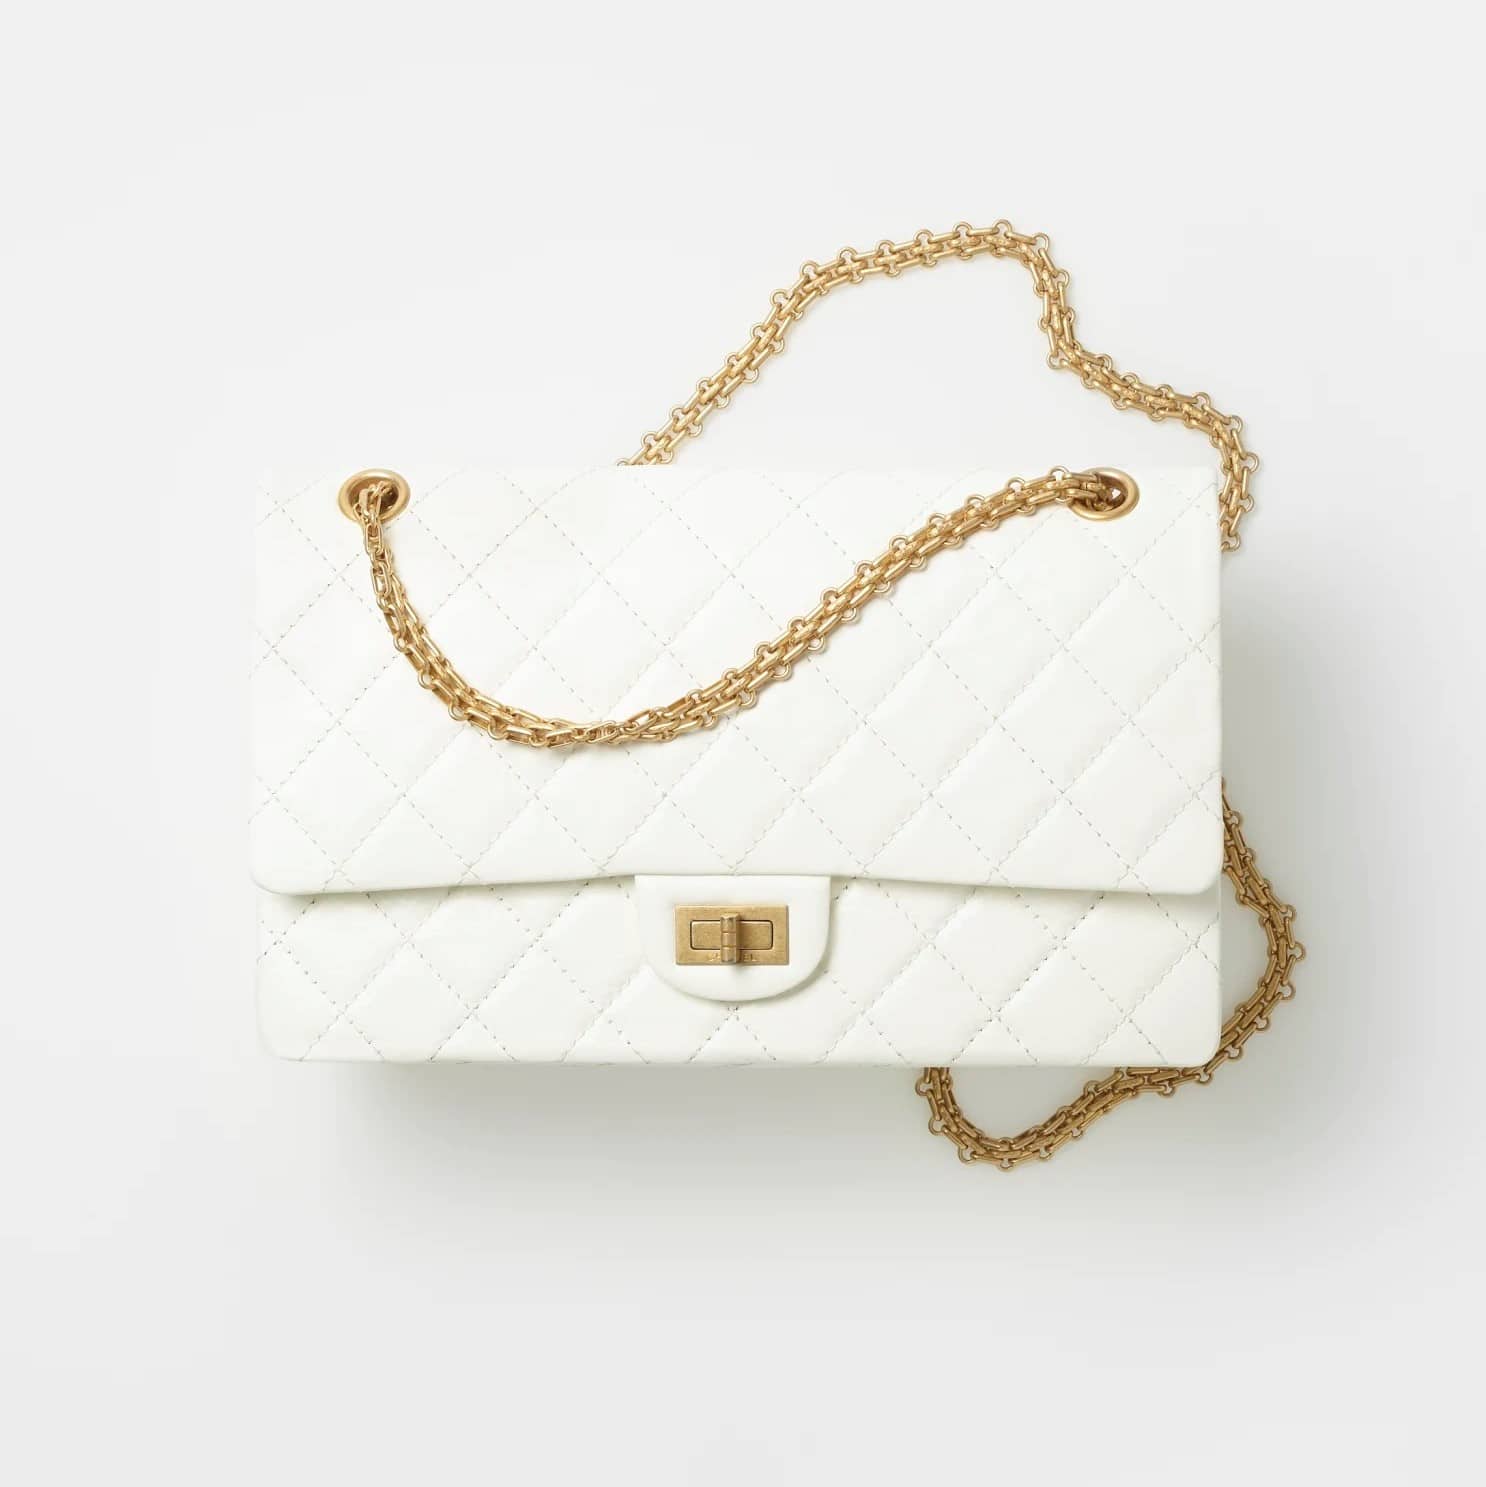 A White Chanel Bag; The Perfect Pick for Summer, Handbags and Accessories